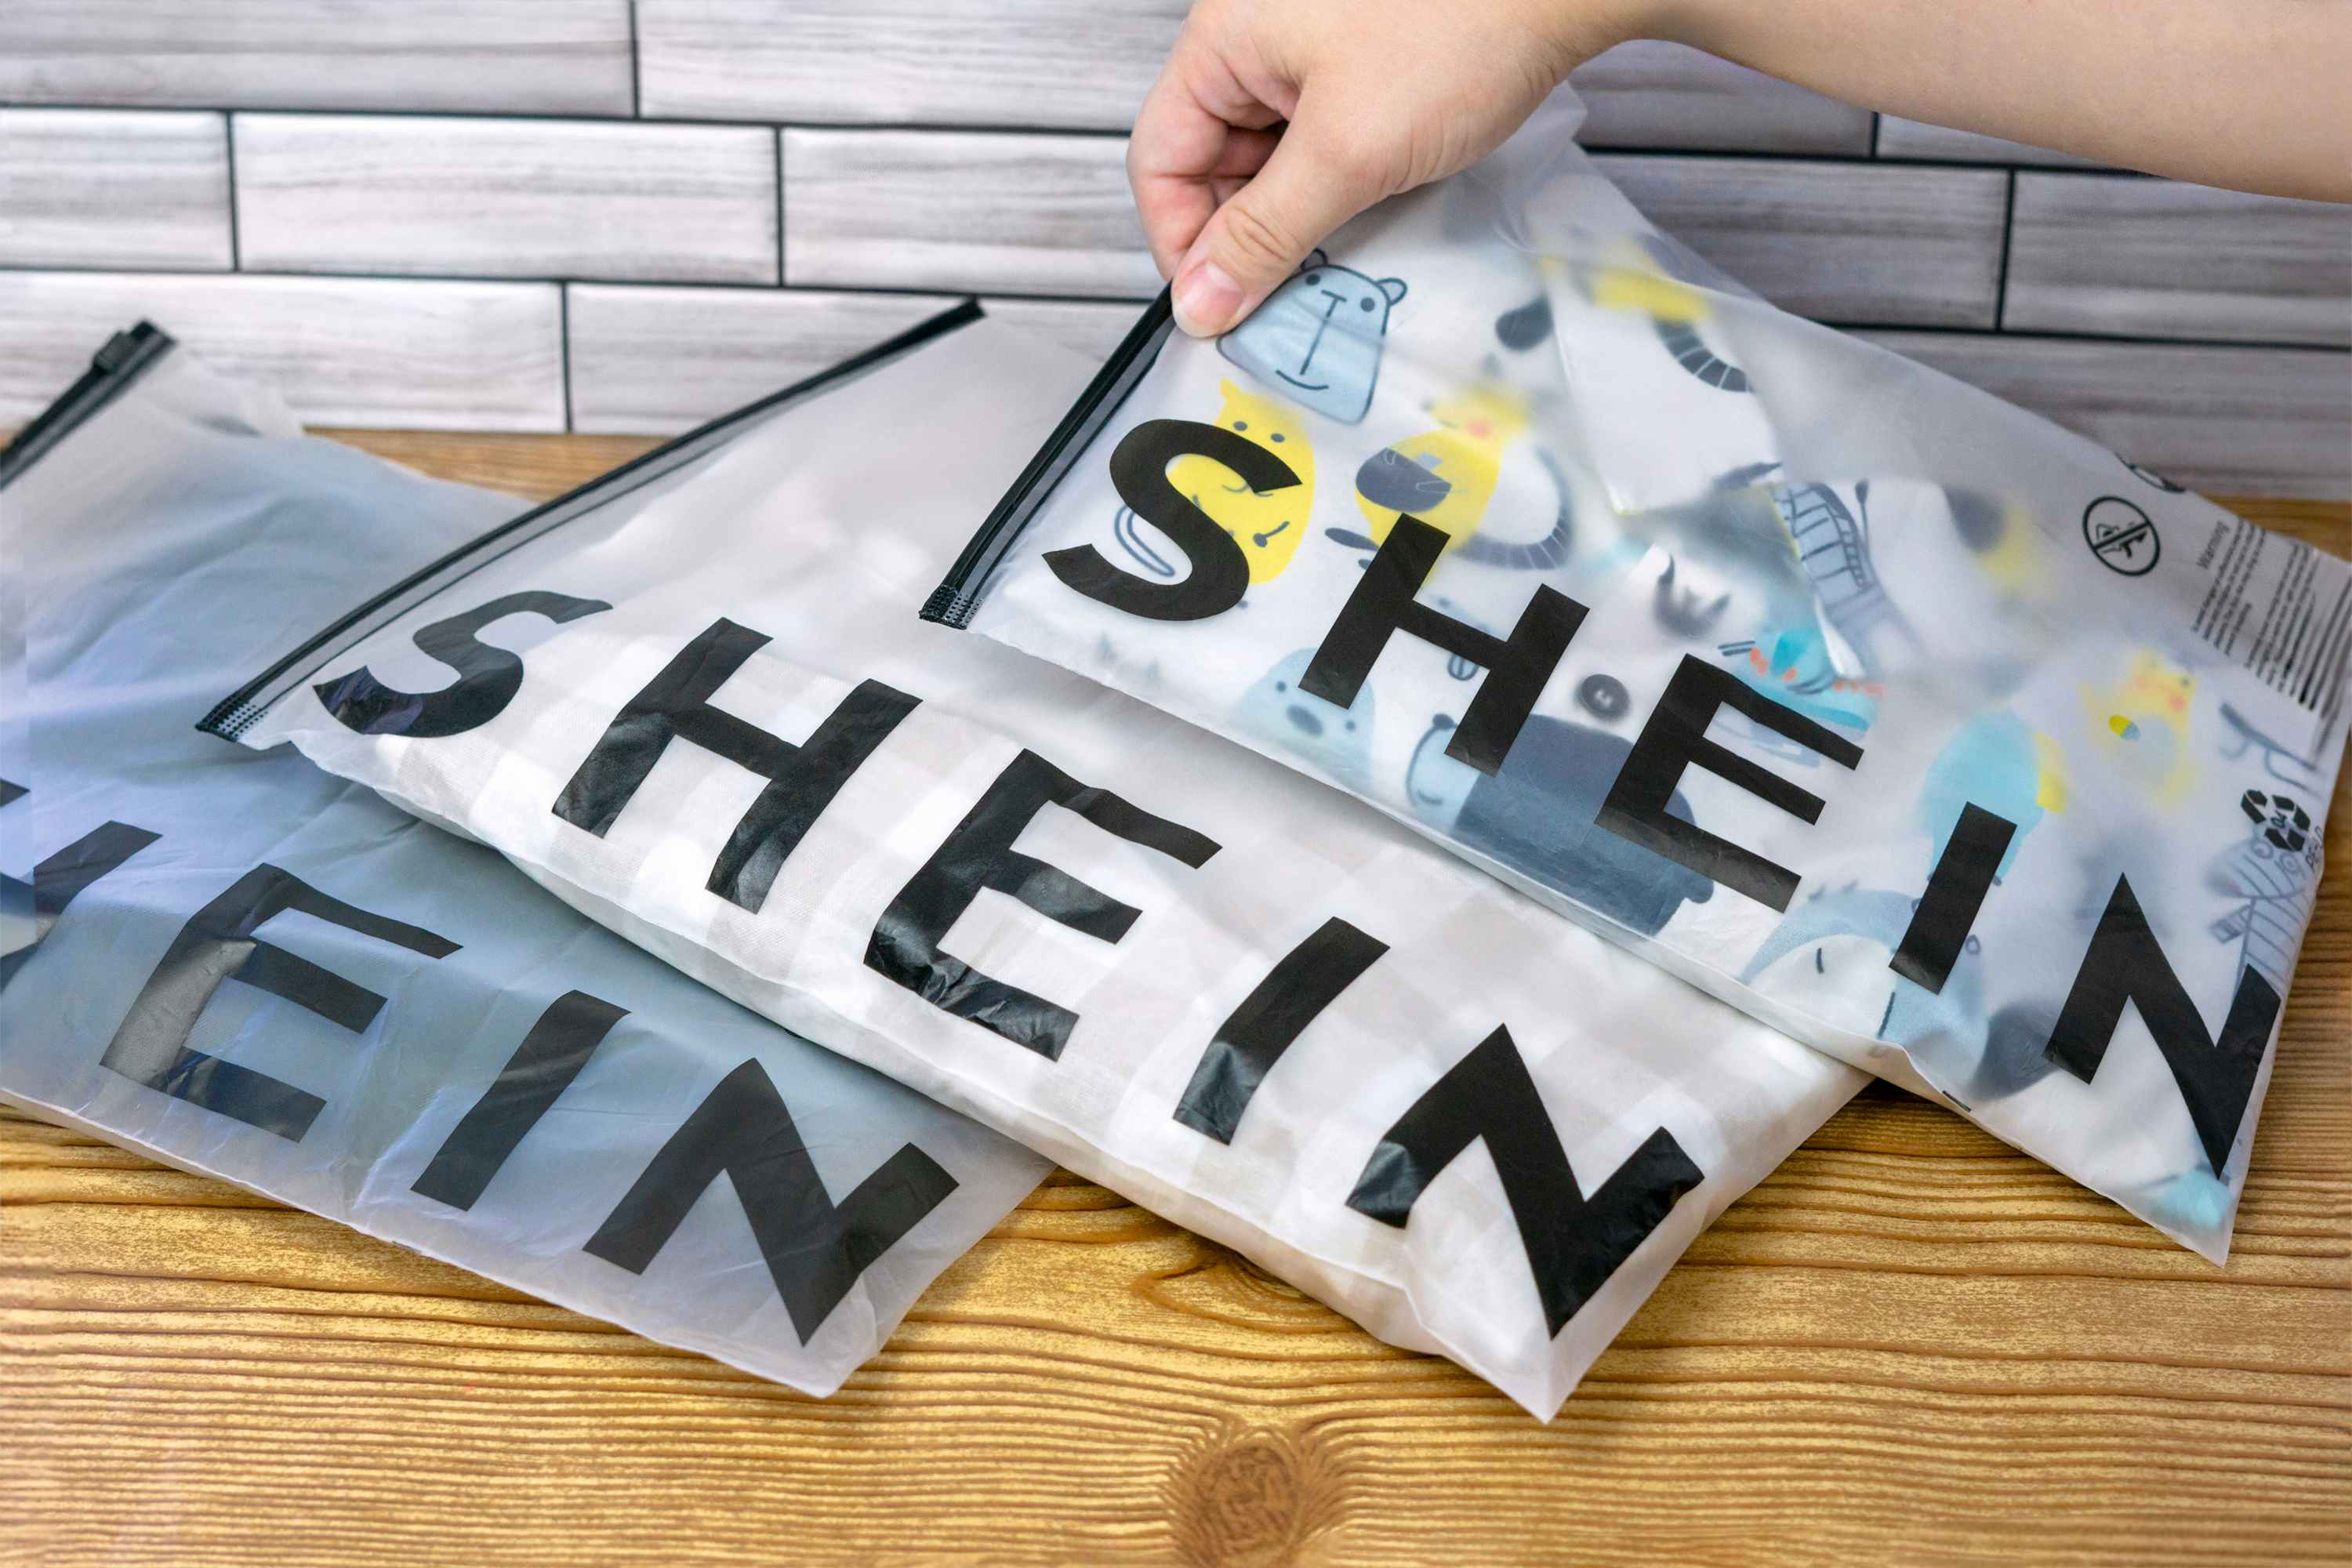 SheIn Return Policy Made Easy - The Krazy Coupon Lady